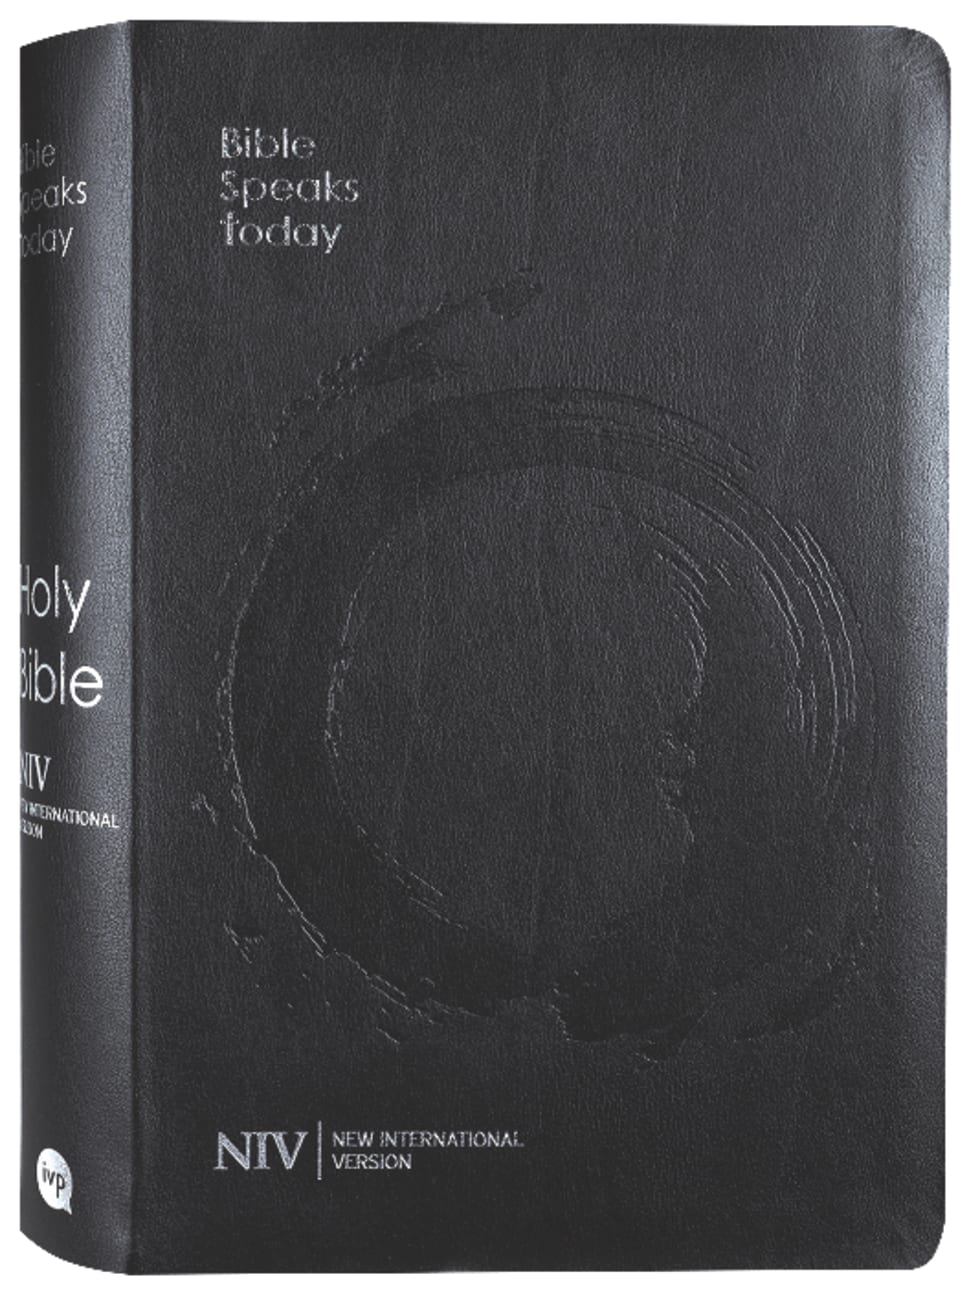 NIV Bible Speaks Today Study Bible Black With Slipcase (Bible Speaks Today Series) Bonded Leather